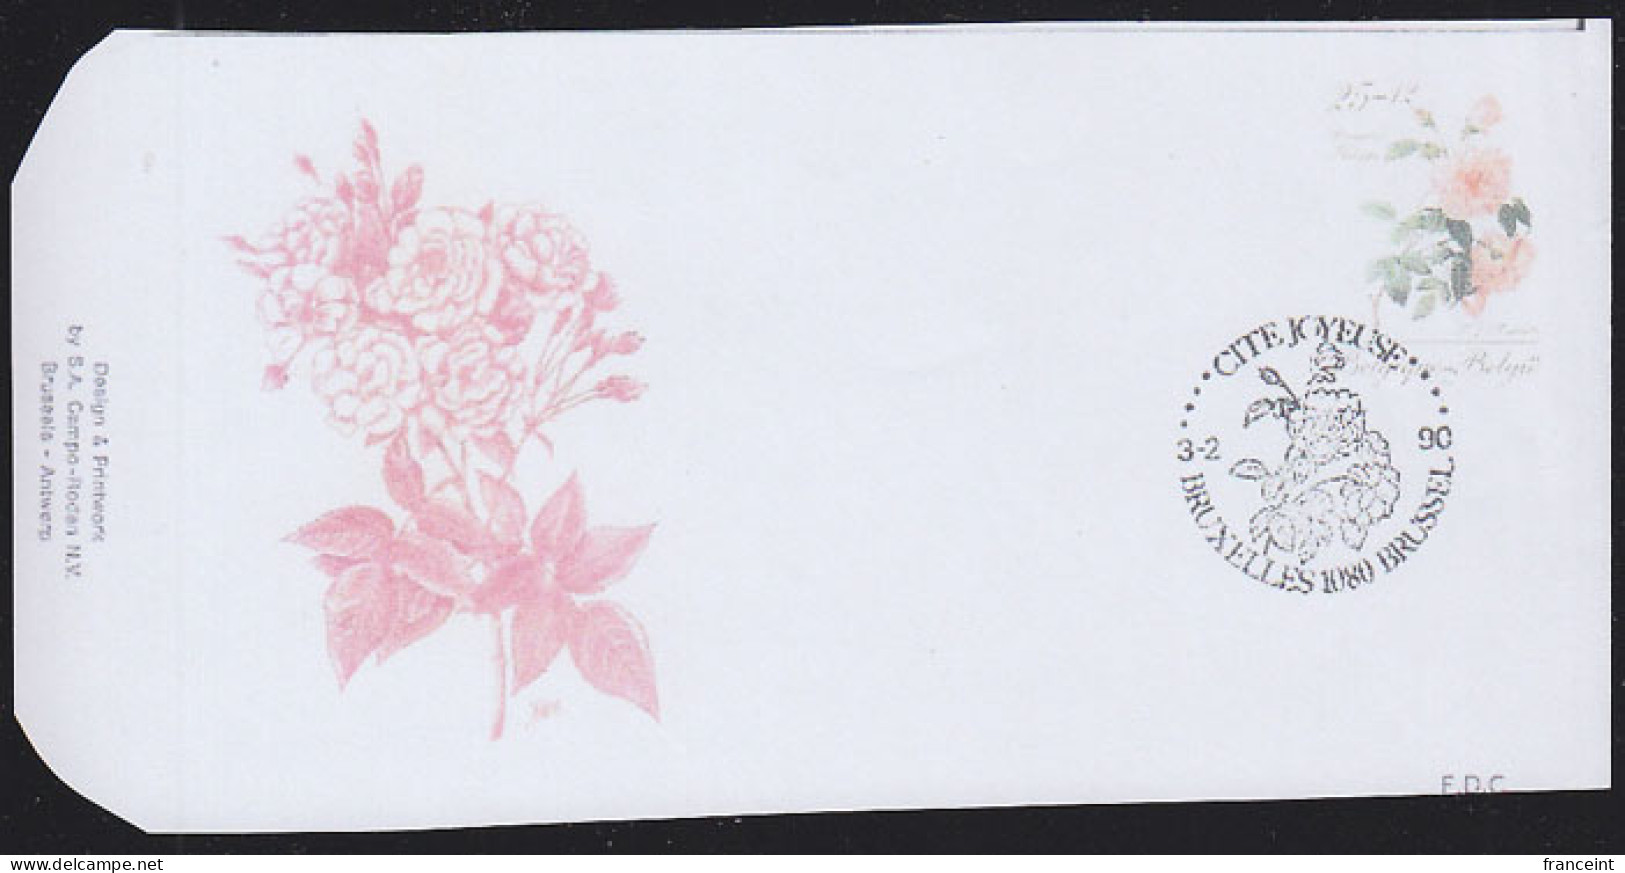 BELGIUM(1990) Bengale Philippe Rose. Die Proof In Red Signed By The Engraver, Representing The Cachet For FDC. Sc B1090 - Ensayos & Reimpresiones